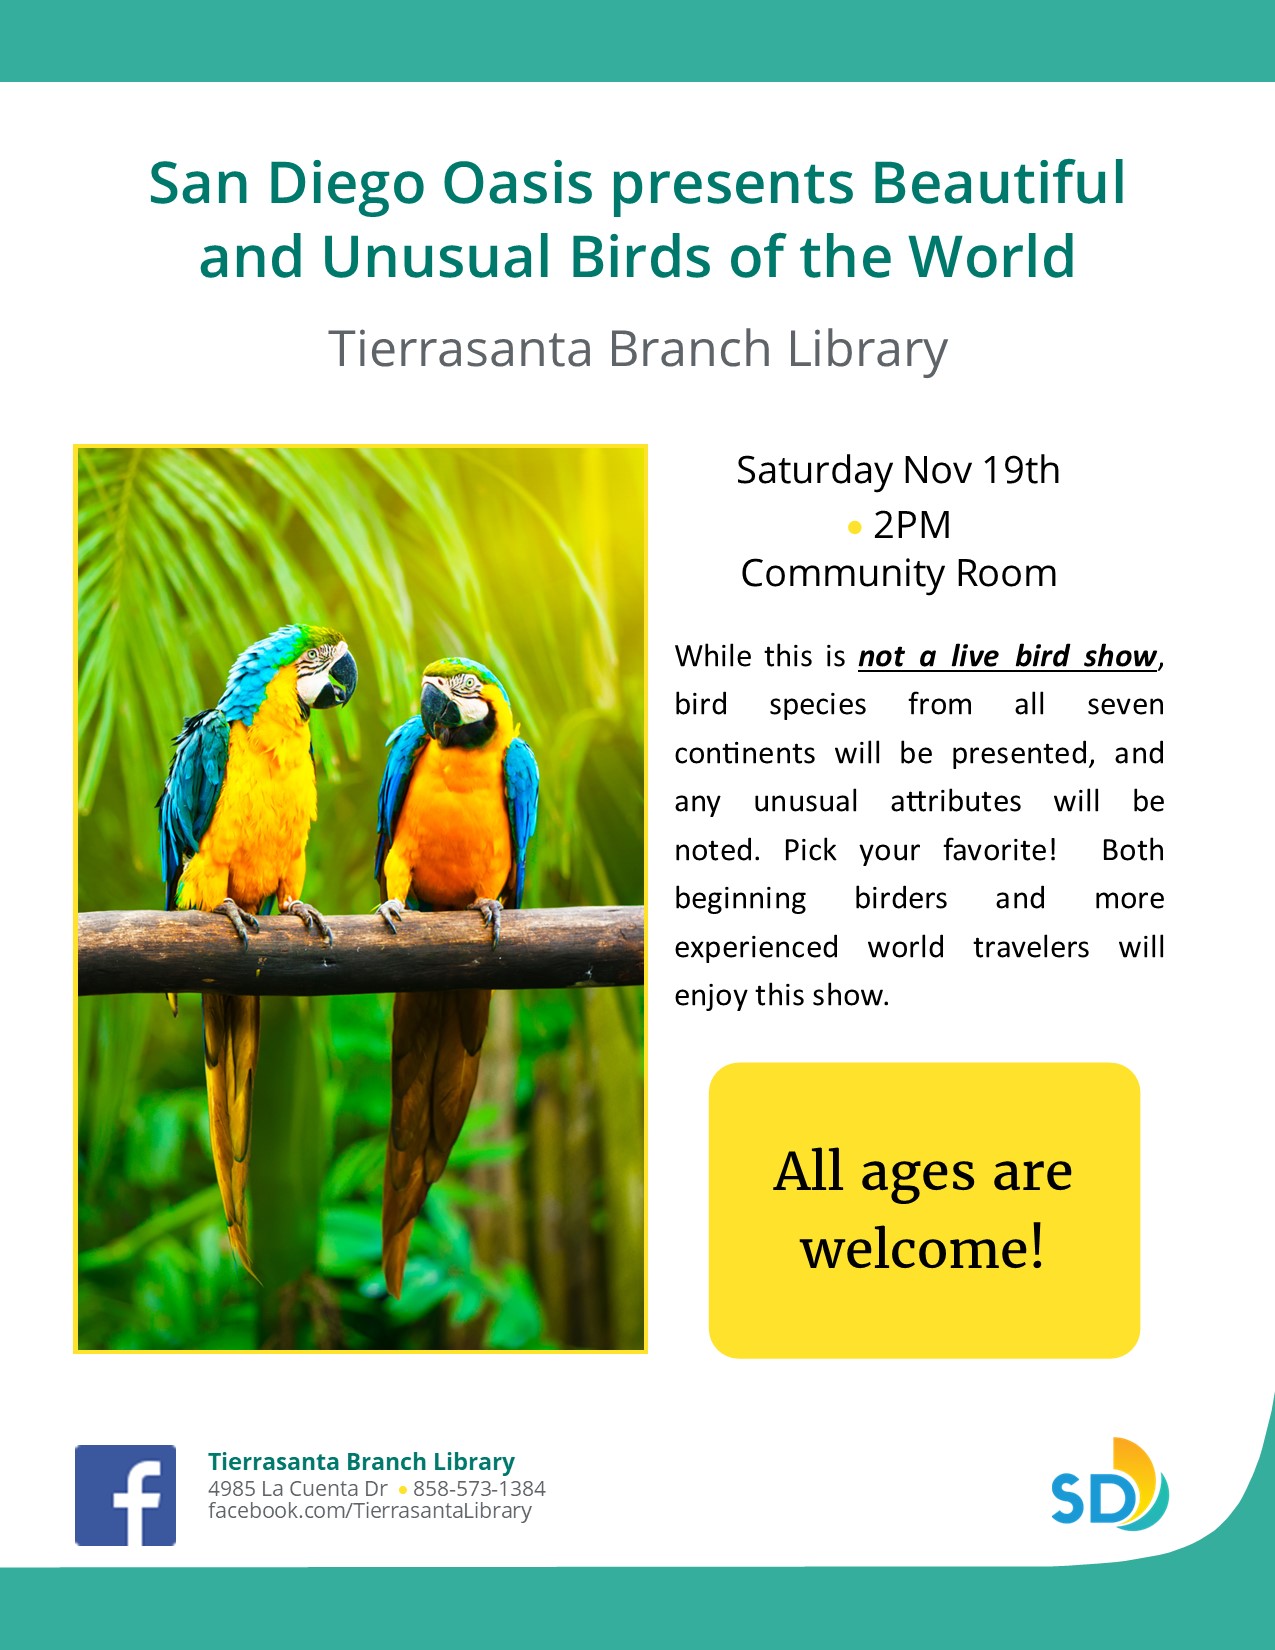 Flyer with two parrots sitting on a tree branch in a tropical setting